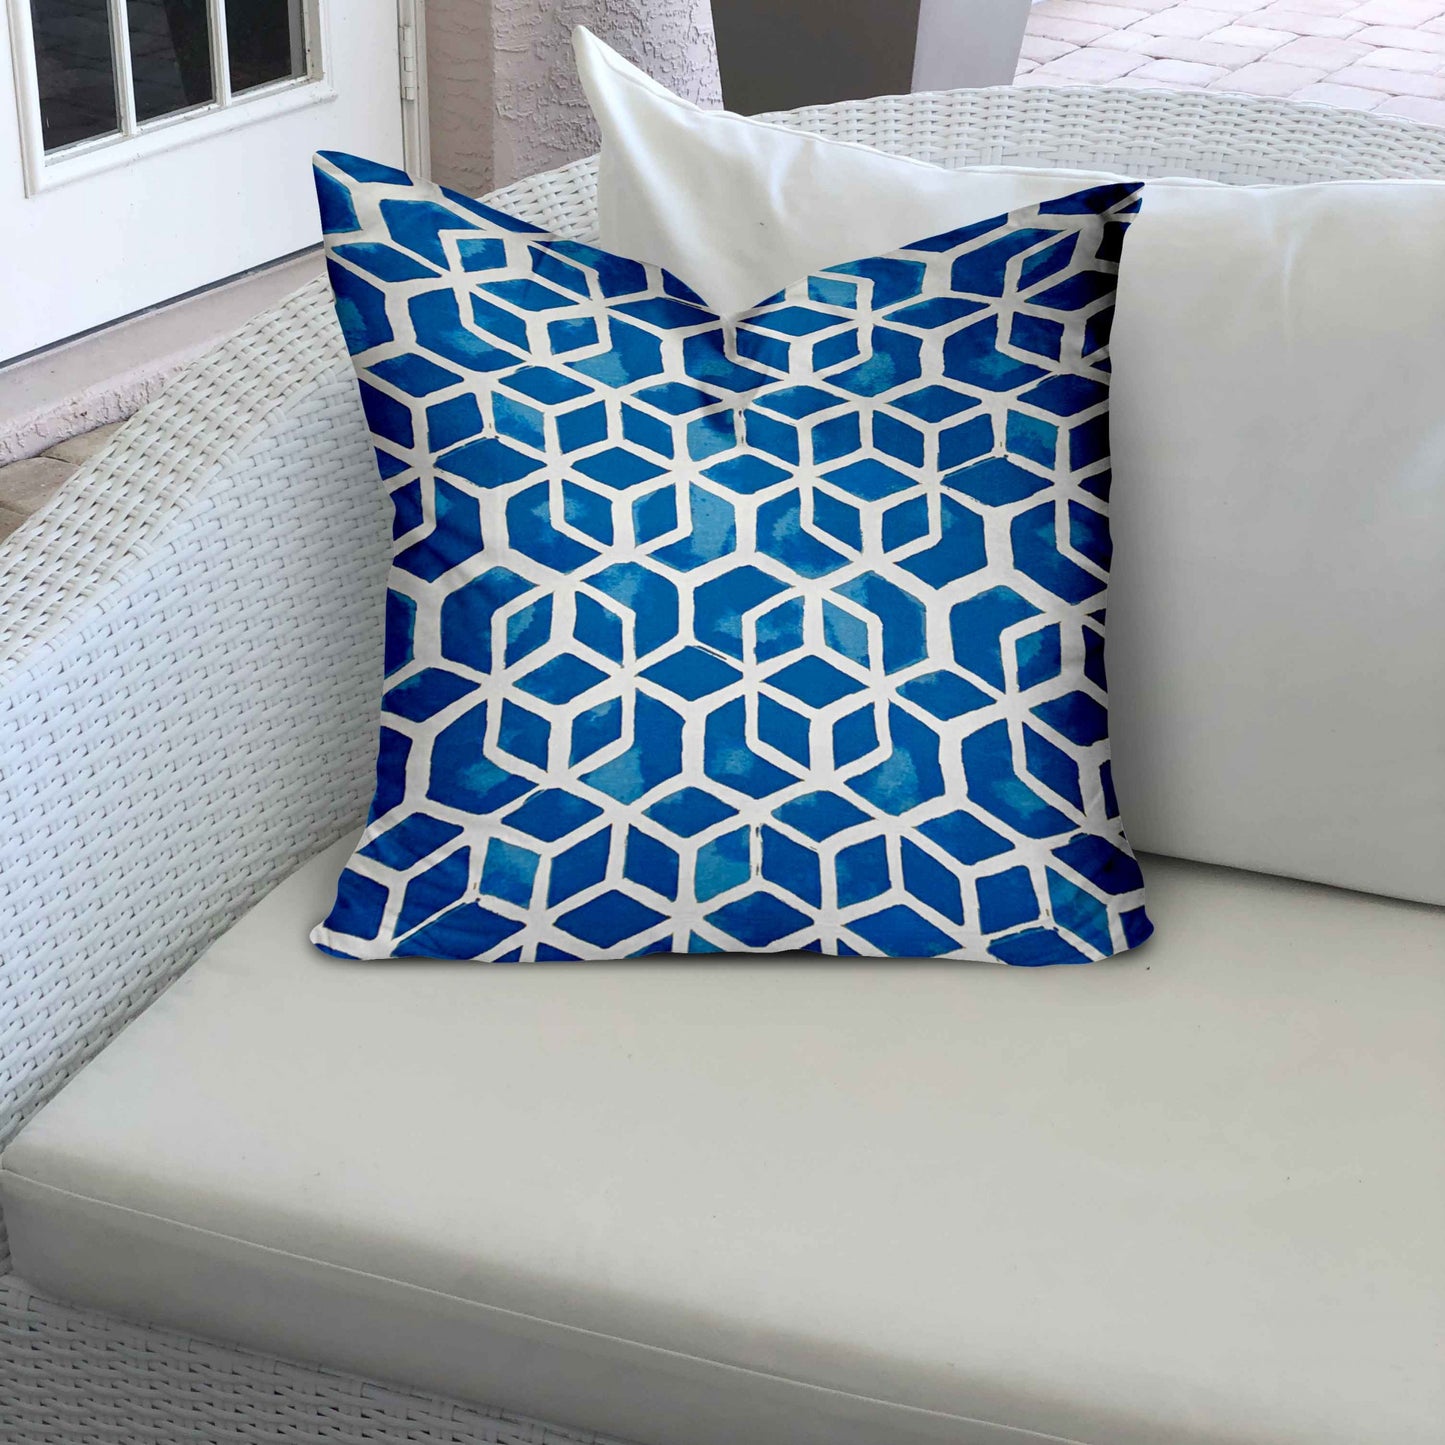 22" X 22" Blue And White Zippered Geometric Throw Indoor Outdoor Pillow